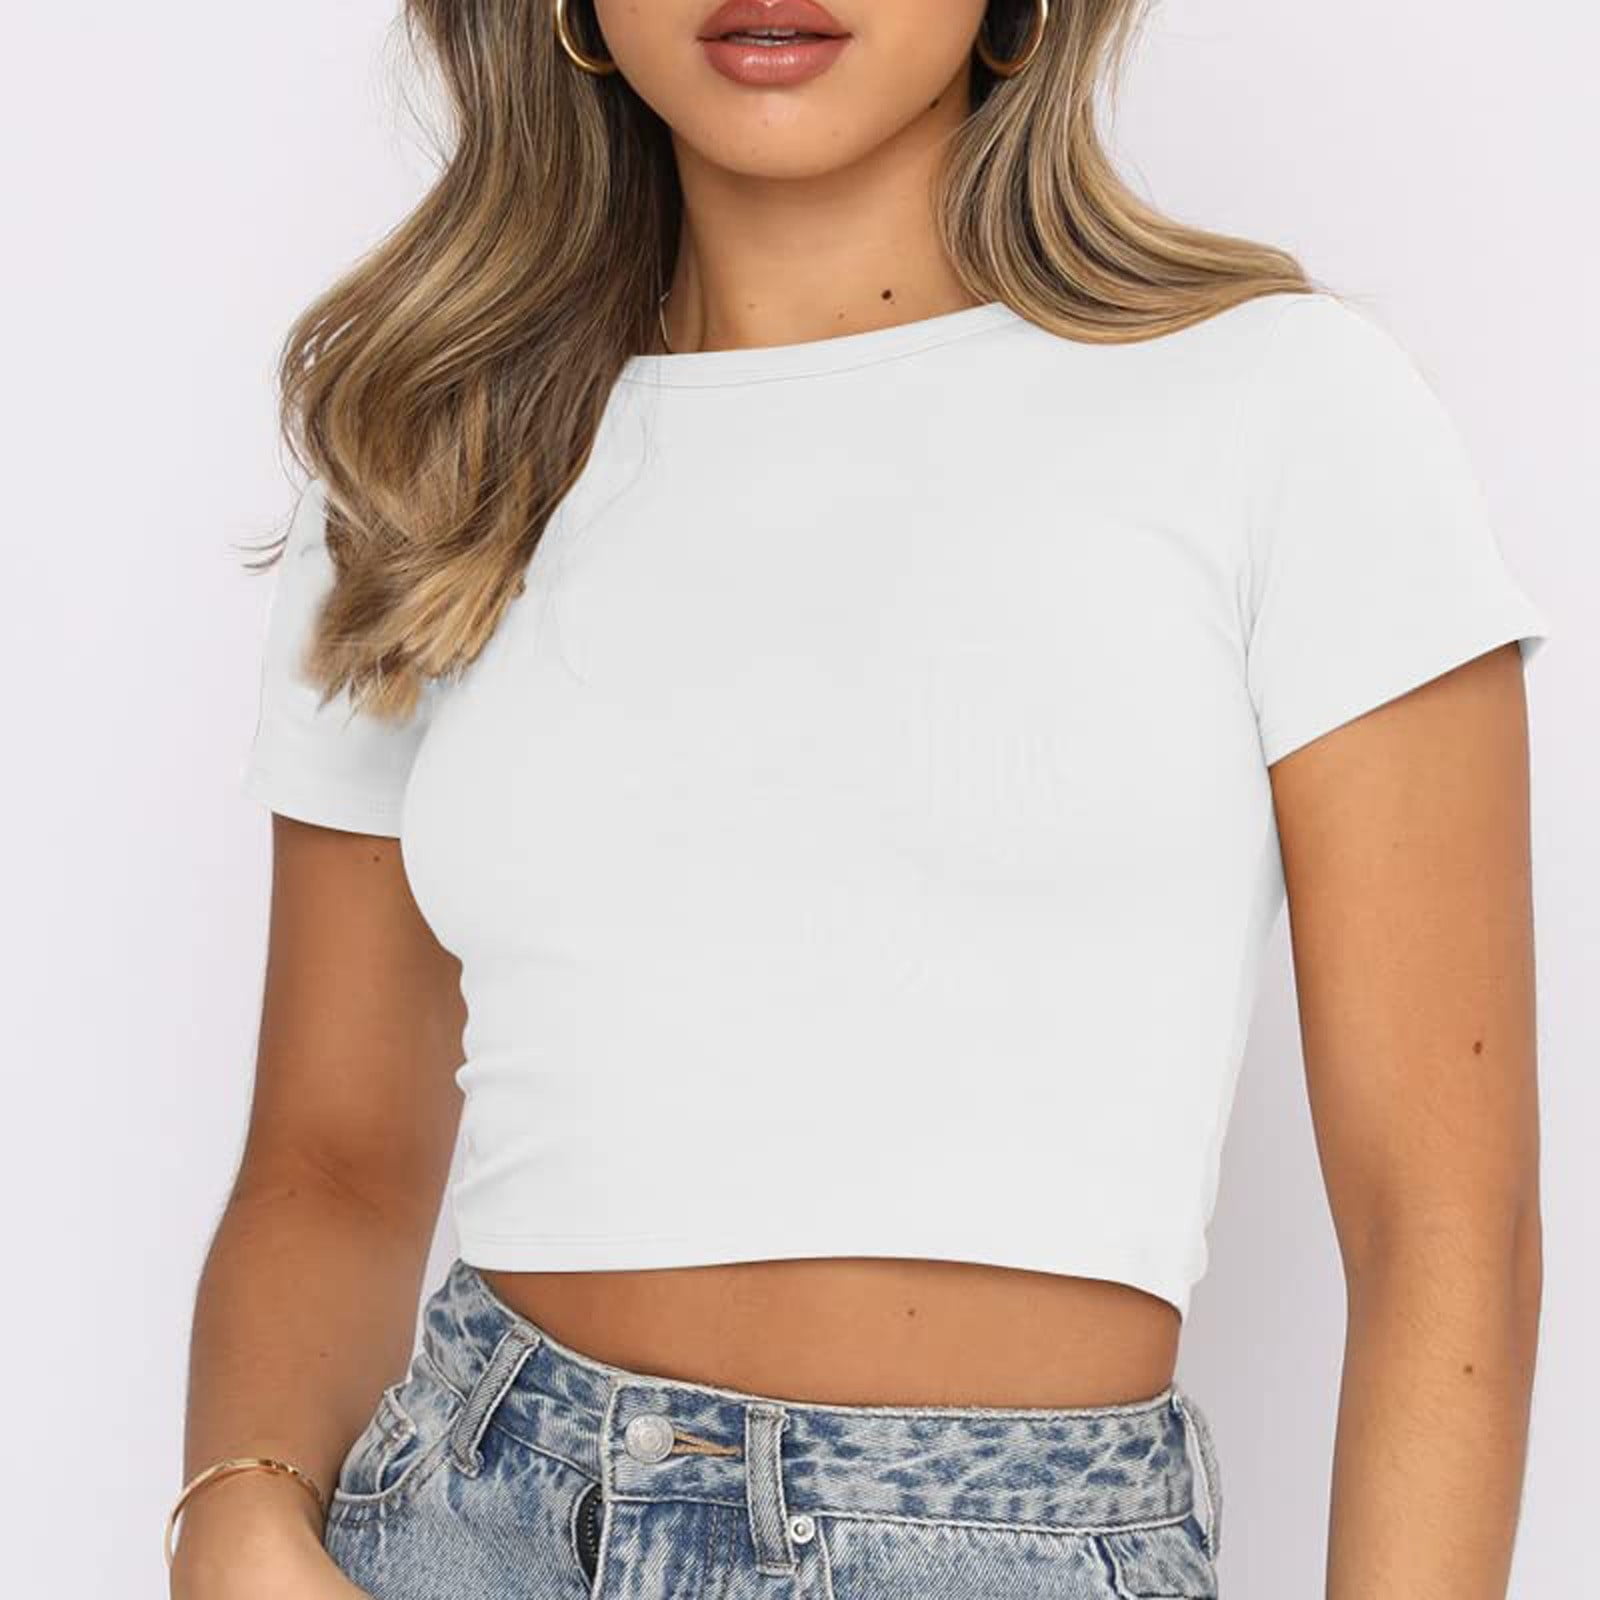 Women's Cute Short Sleeve High Neck Double Lined Tight T Shirts Crop Tops Tees, Tops Cute Trendy Basic Tight Scoop Neck Crop Sleeve Crop Top for Women or Teen -